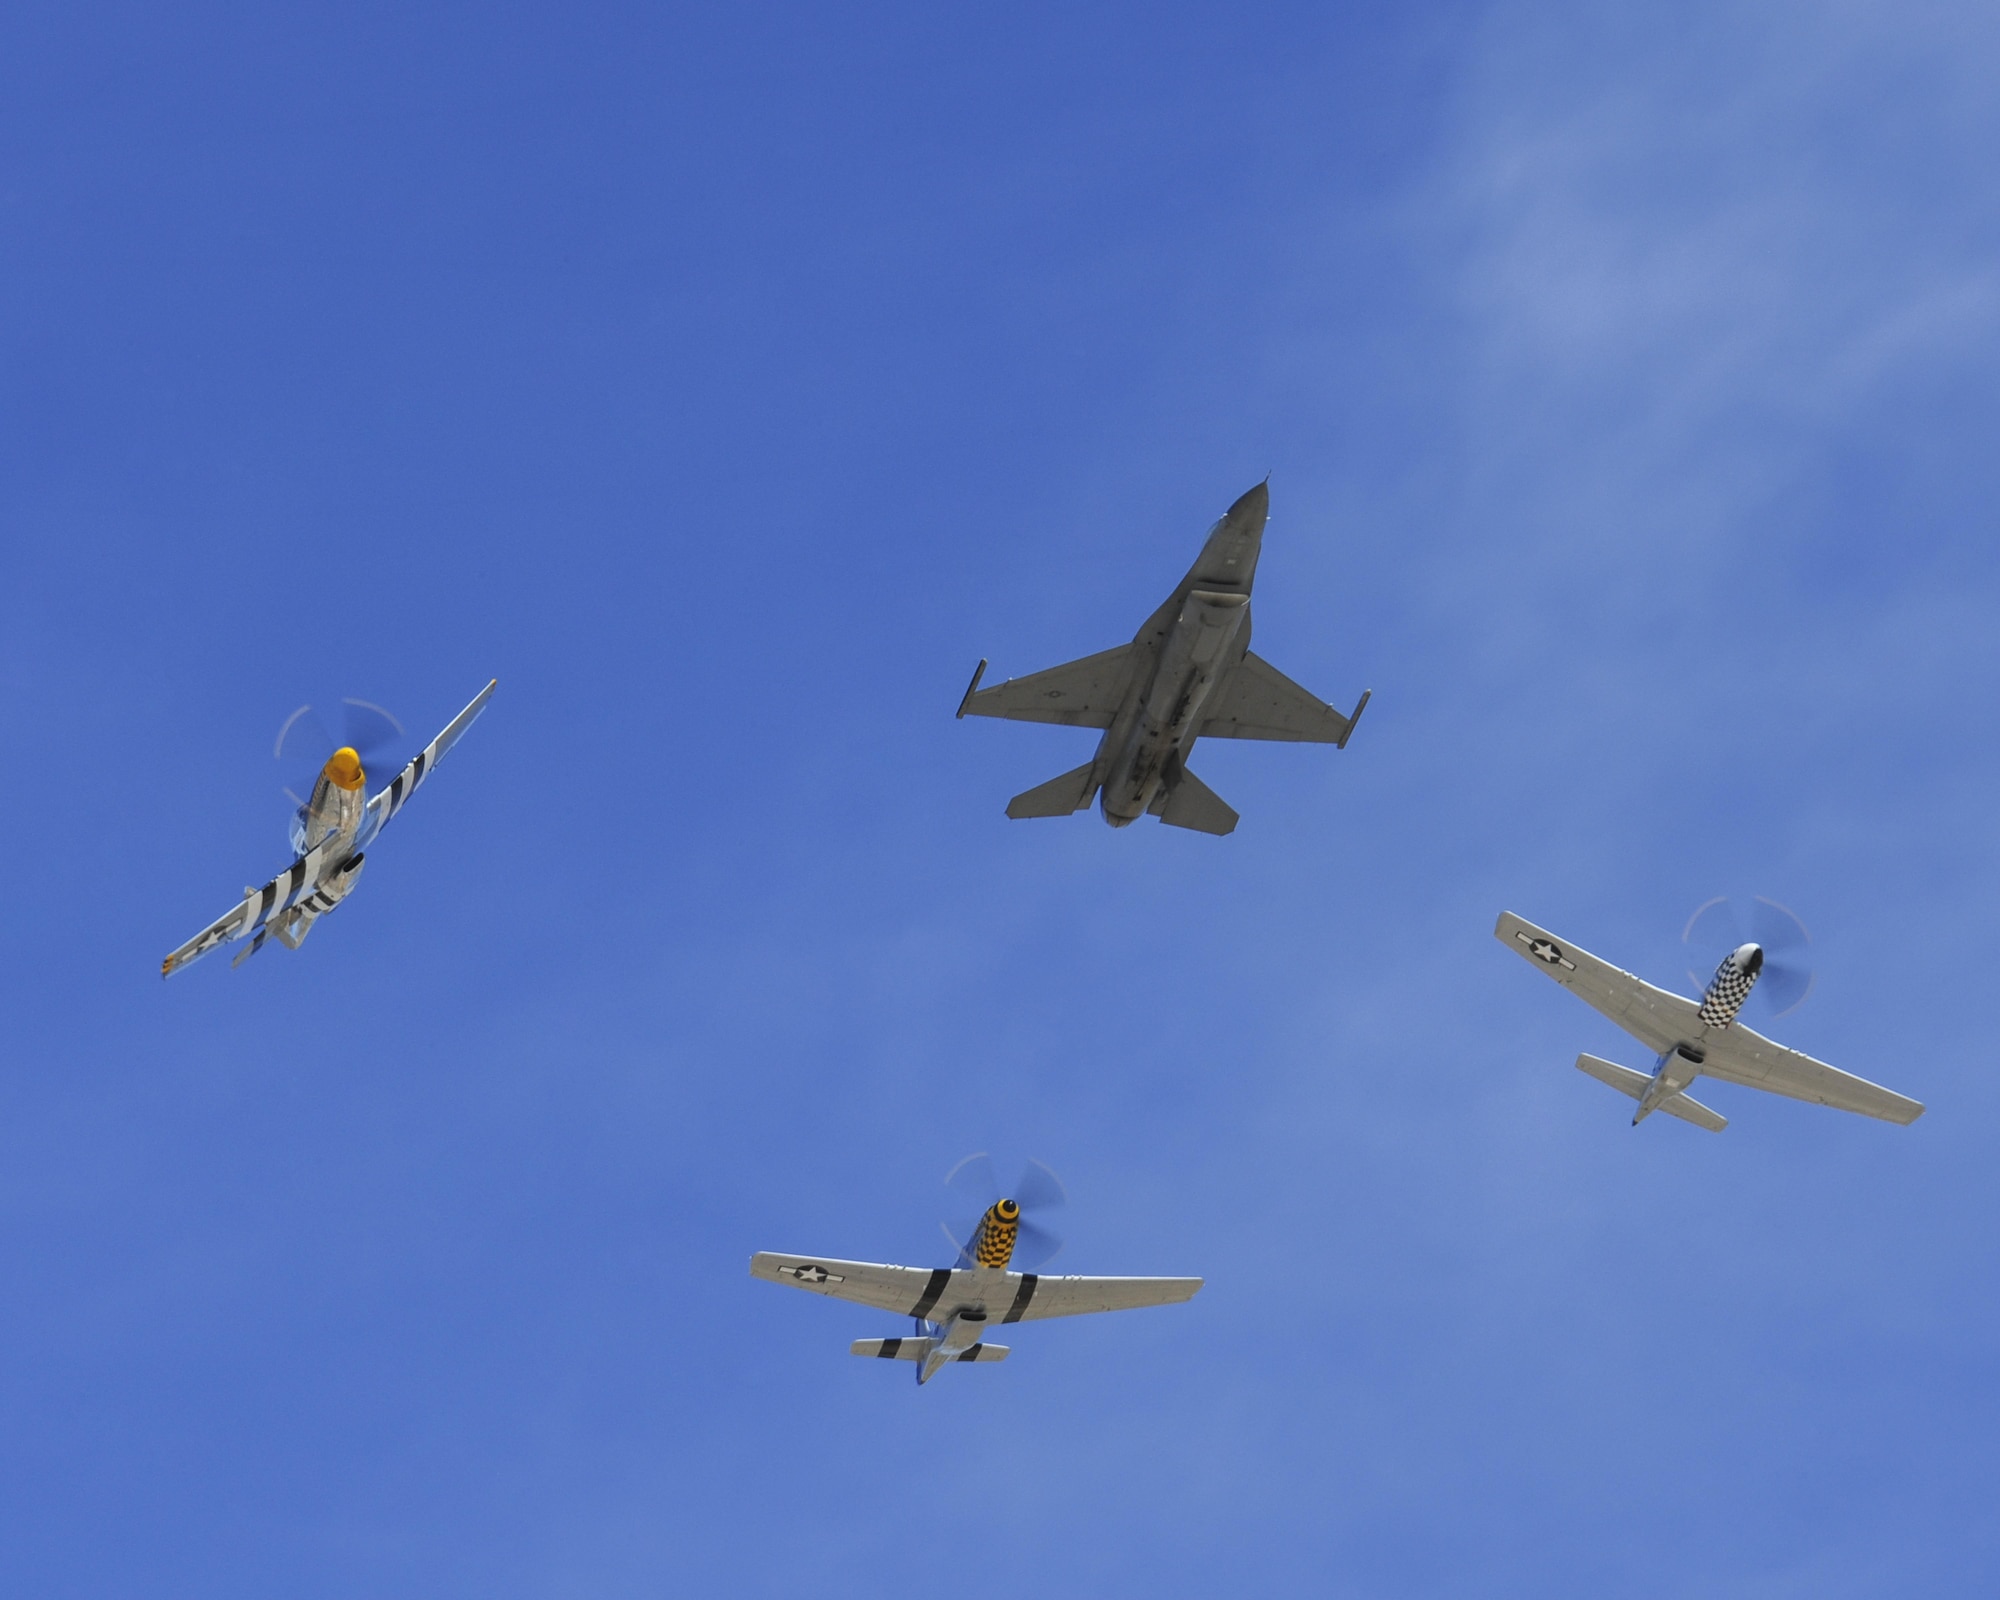 A U.S. Air Force F-16 Fighting Falcon, front, leads a formation followed by three P-51 Mustangs during the 2016 Heritage Flight Training and Certification Course at Davis-Monthan Air Force Base, Ariz., March 4, 2016. Established in 1997, the HFTCC certifies civilian pilots of historic military aircraft and U.S. Air Force pilots to fly in formation together during the upcoming air show season. (U.S. Air Force photo by Senior Airman Chris Massey/Released)